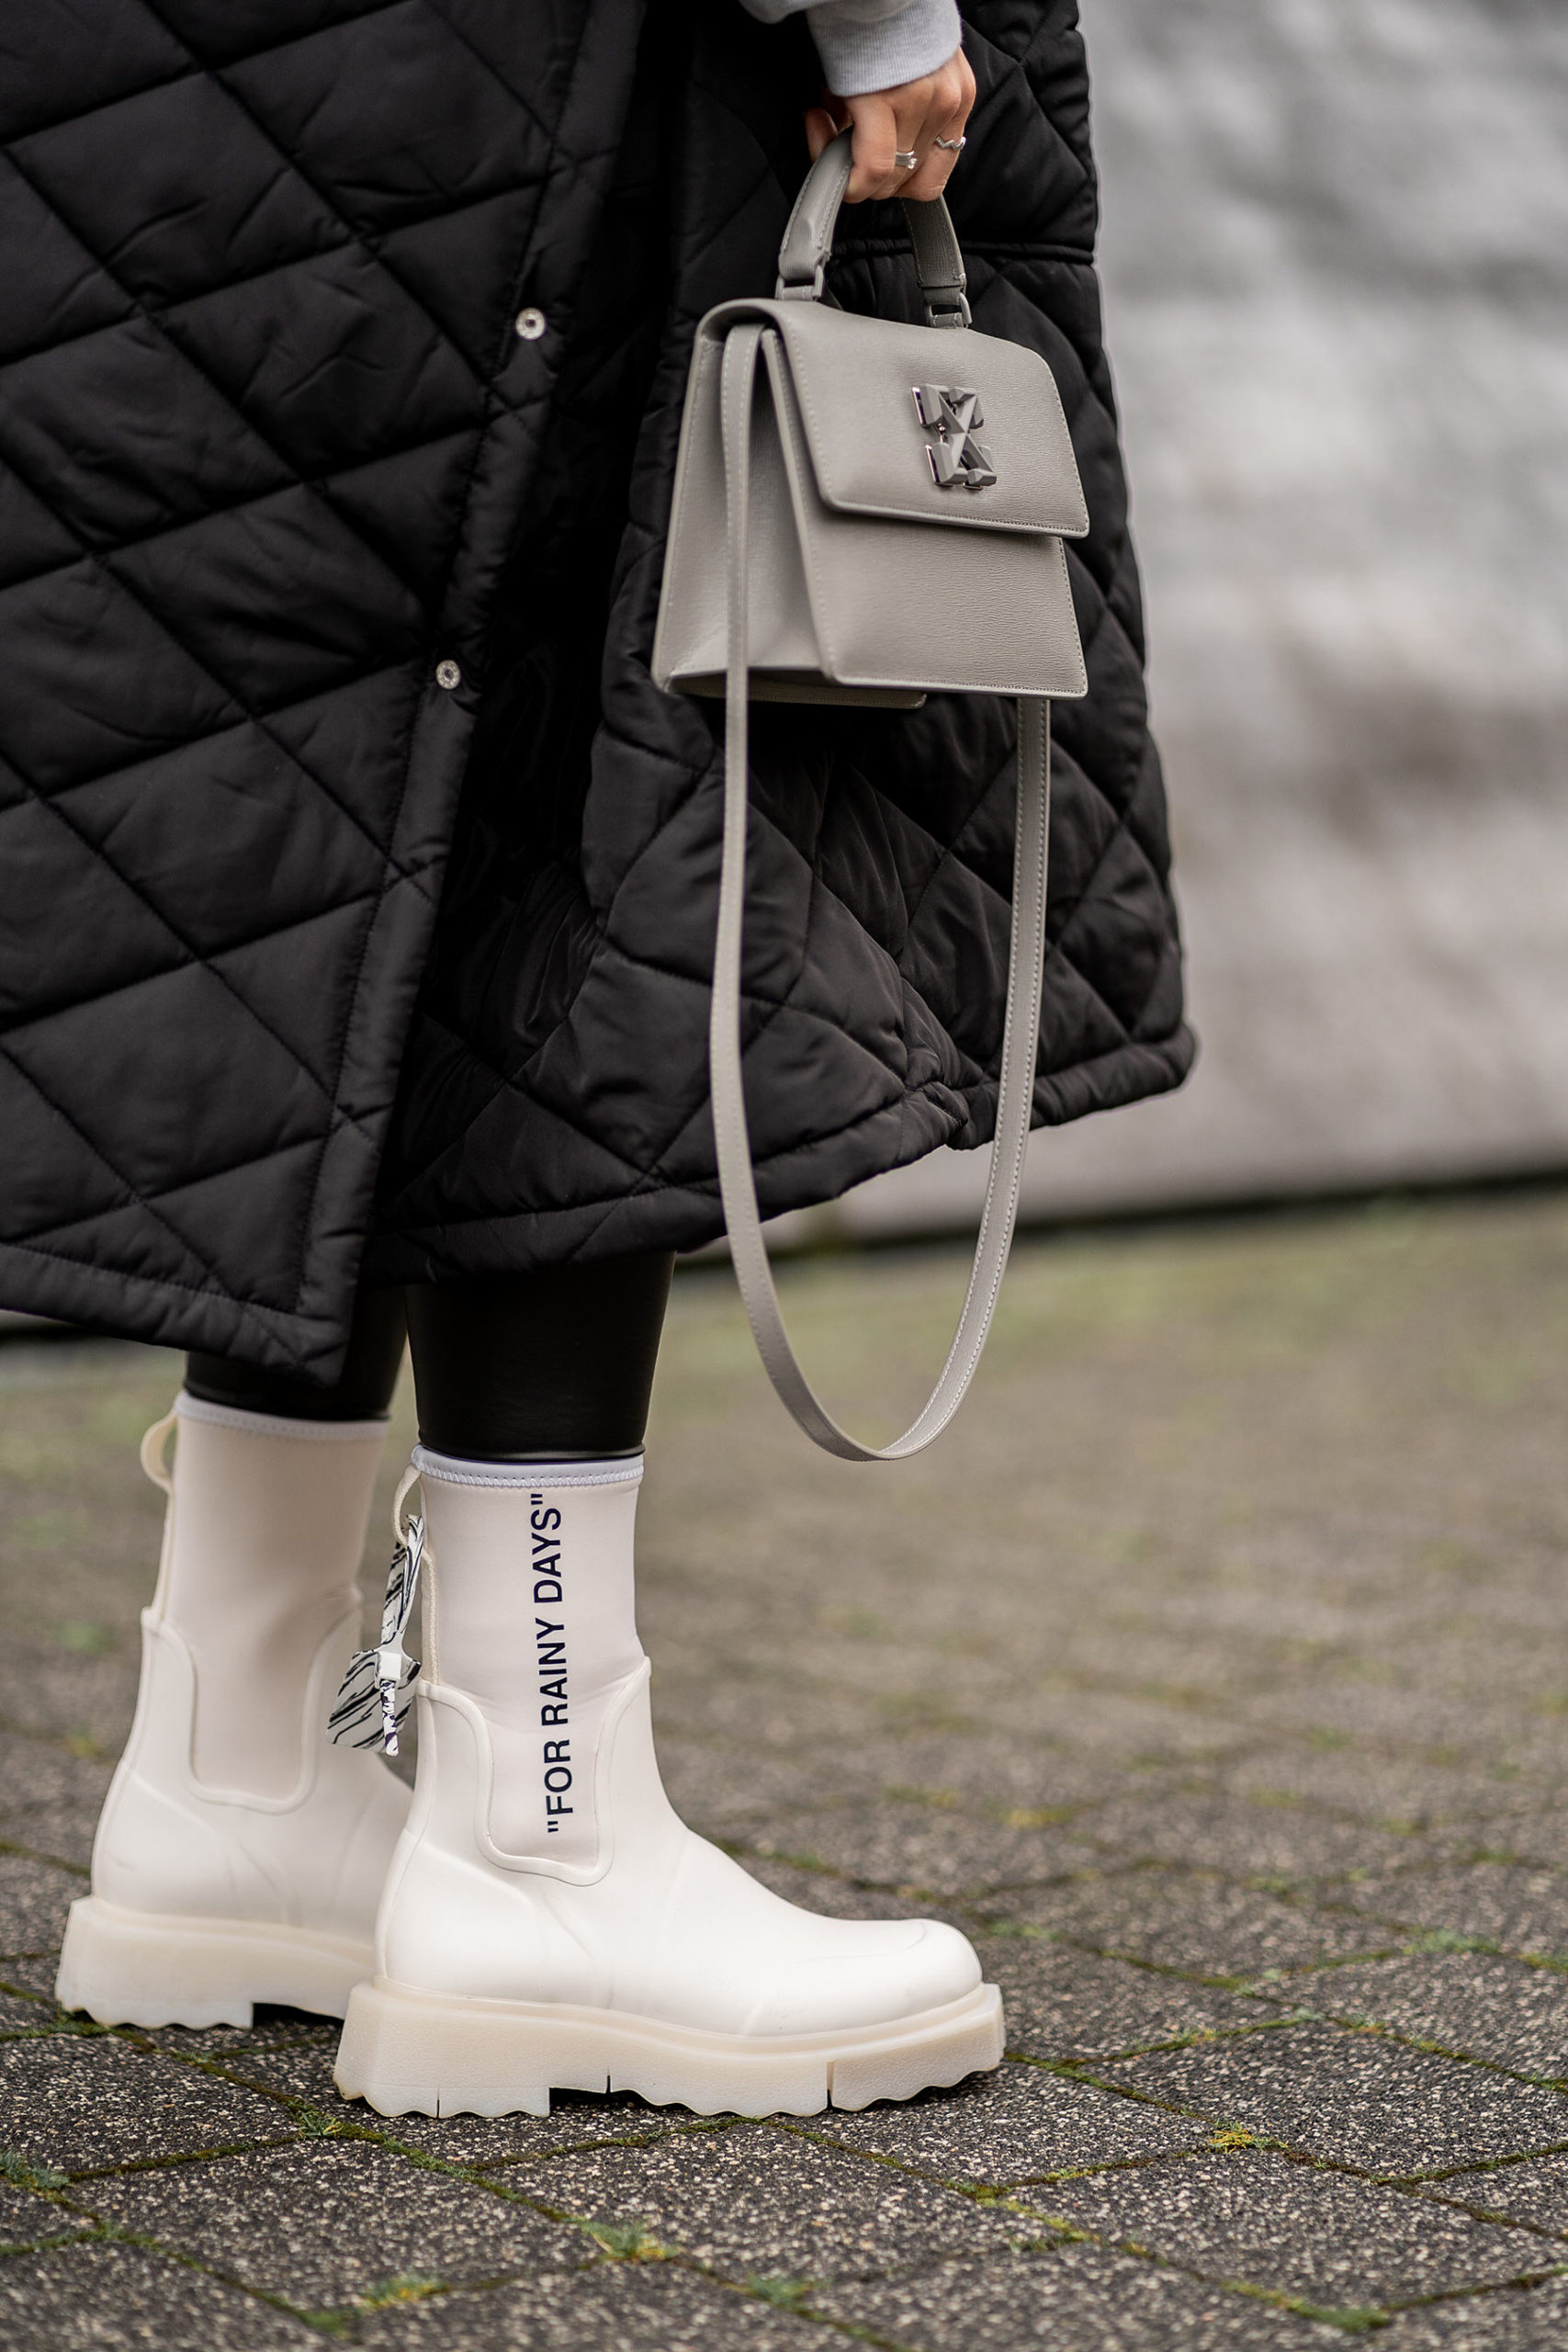 off white boots for rainy days outfit fashion blogger inga brauer